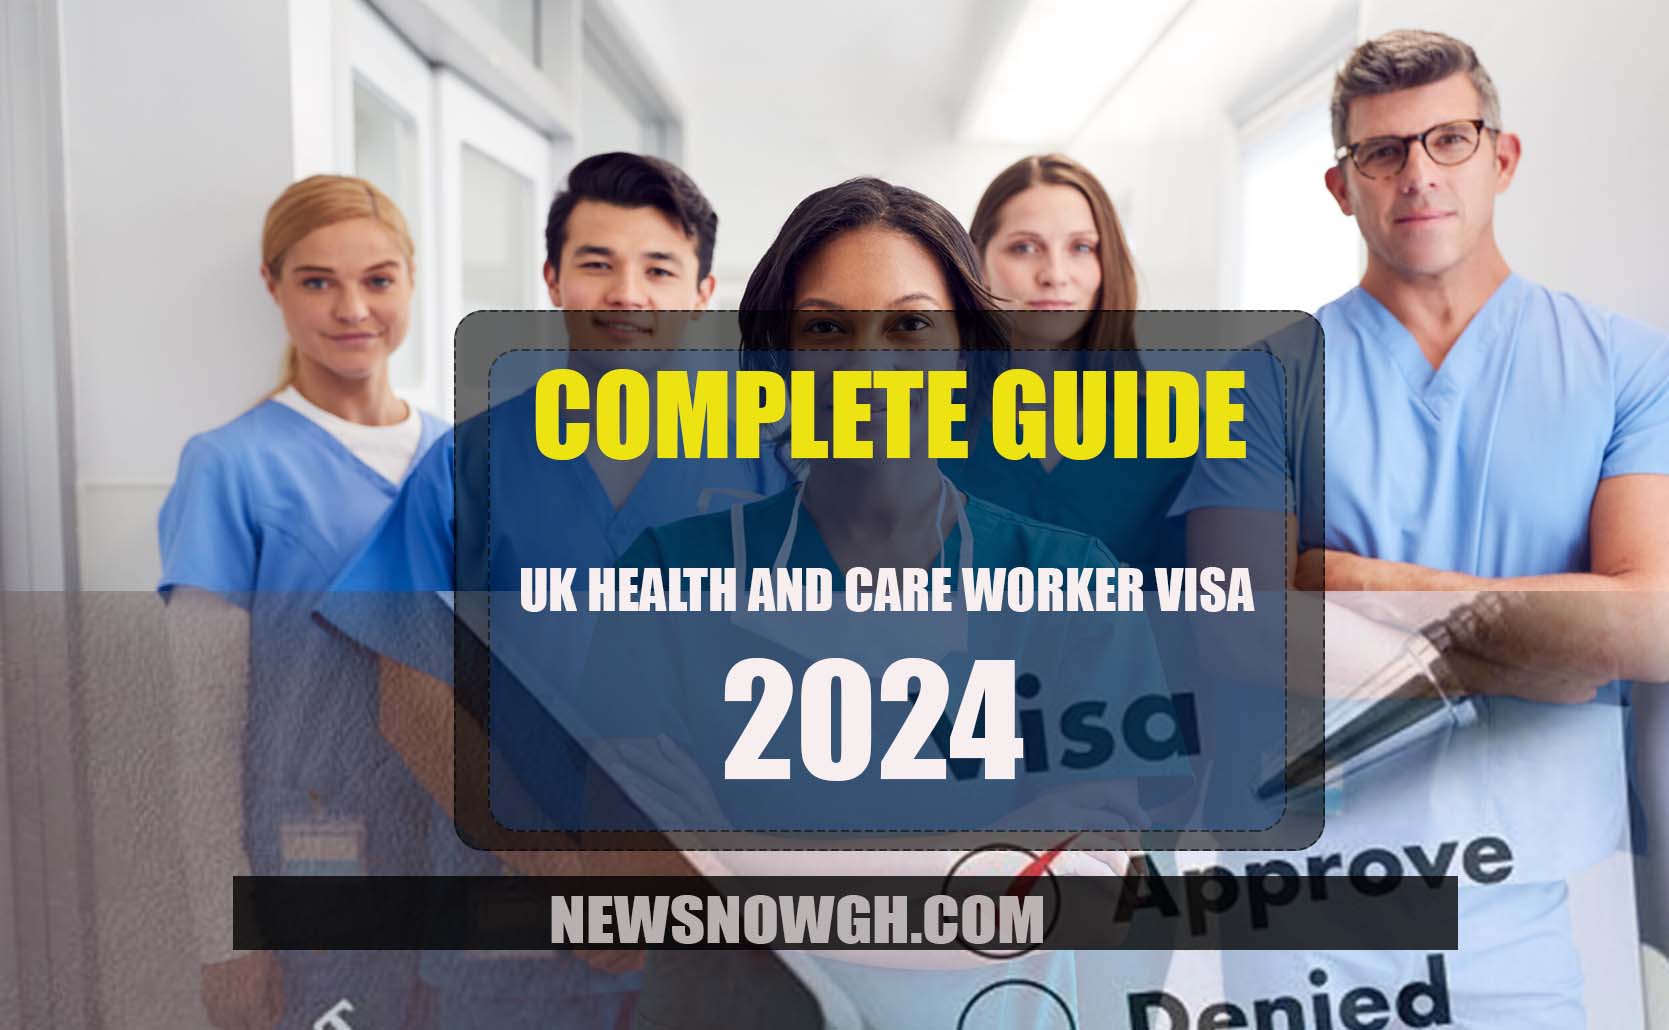 UK Health and Care Worker Visa 2024 Complete Guide